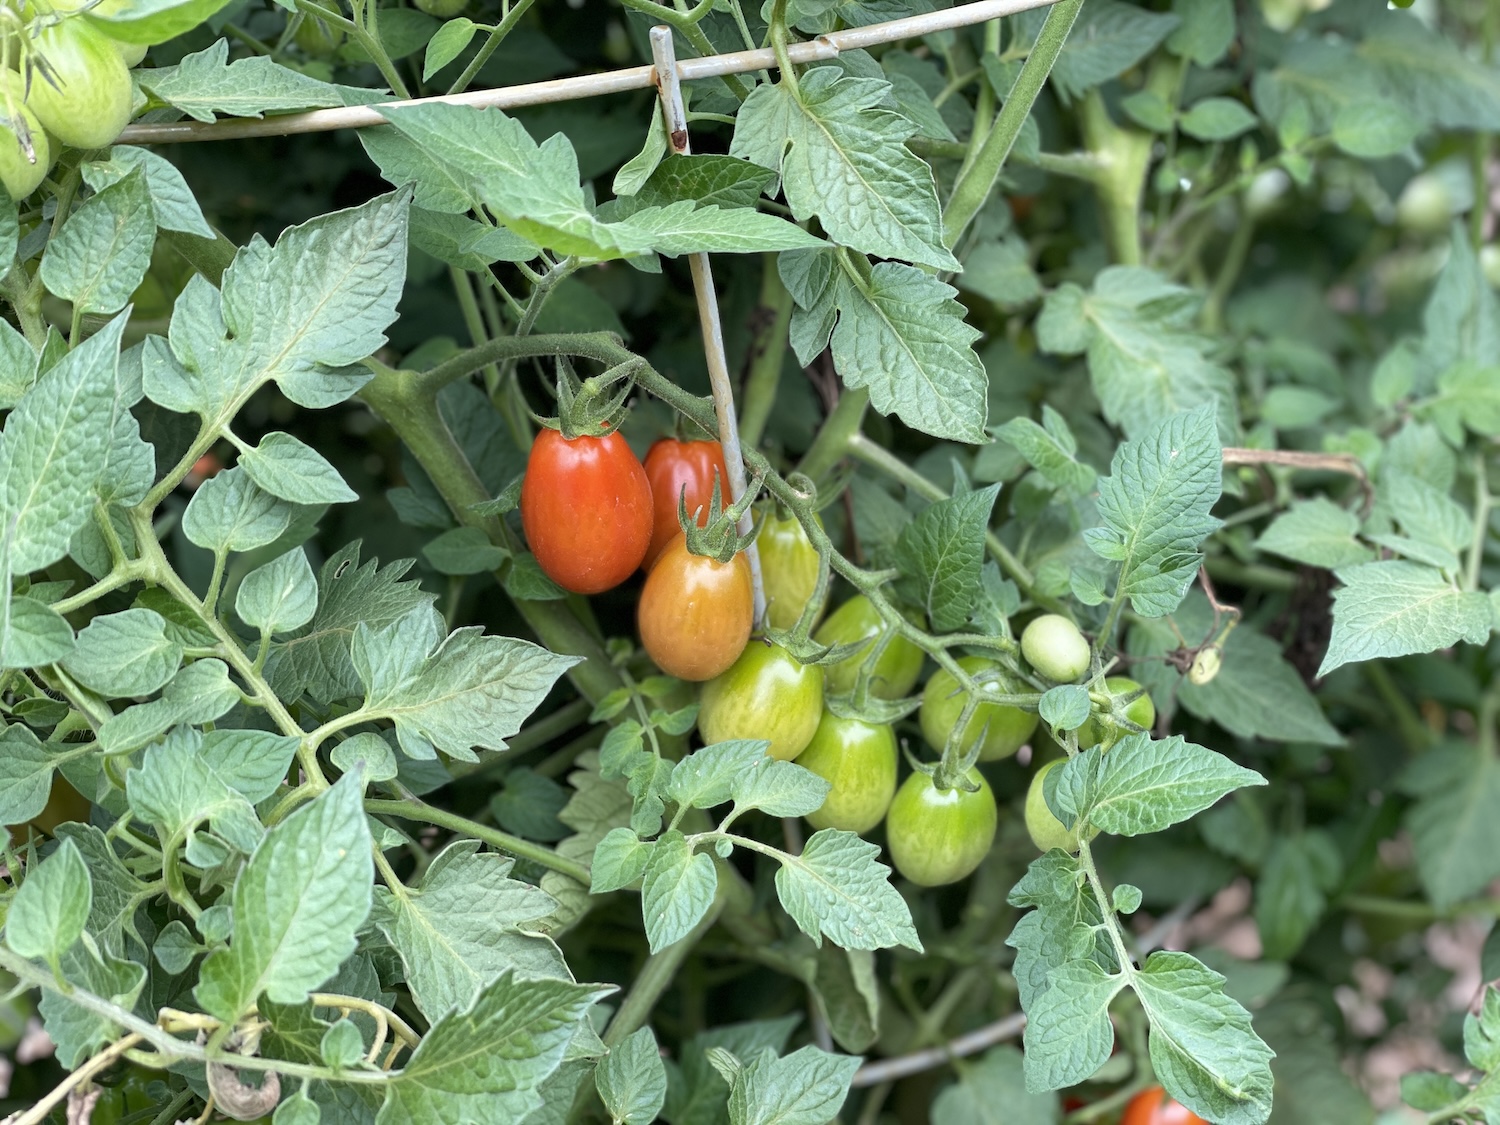 A close up view of indeterminate cherry tomatoes ripening on the vine